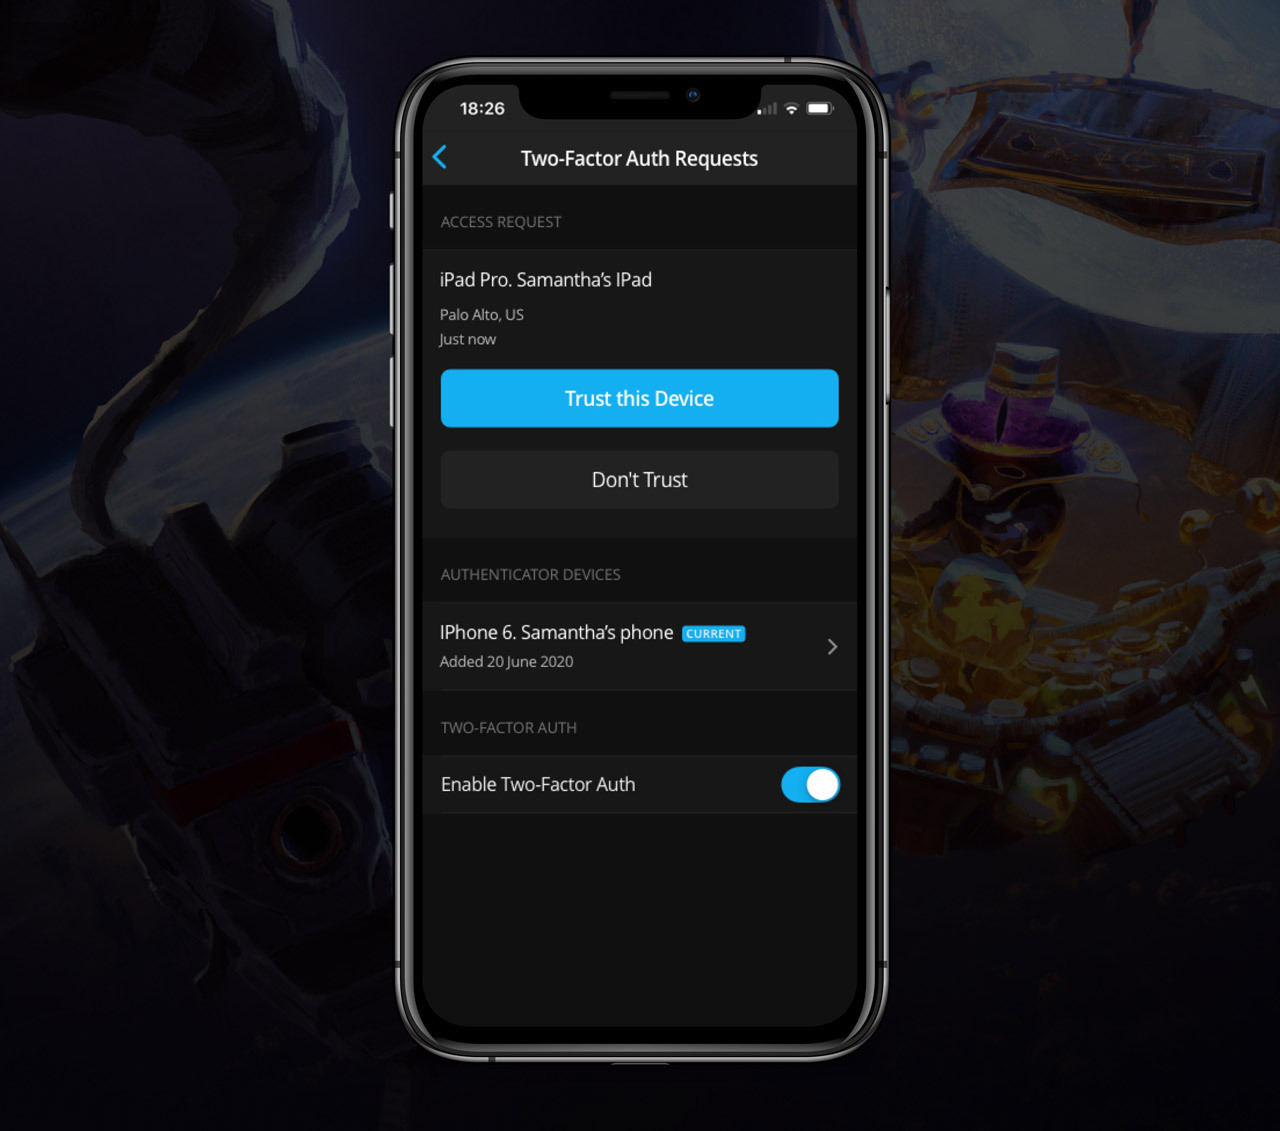 Enable and use two-factor authentication (2FA) for your Blizzard account